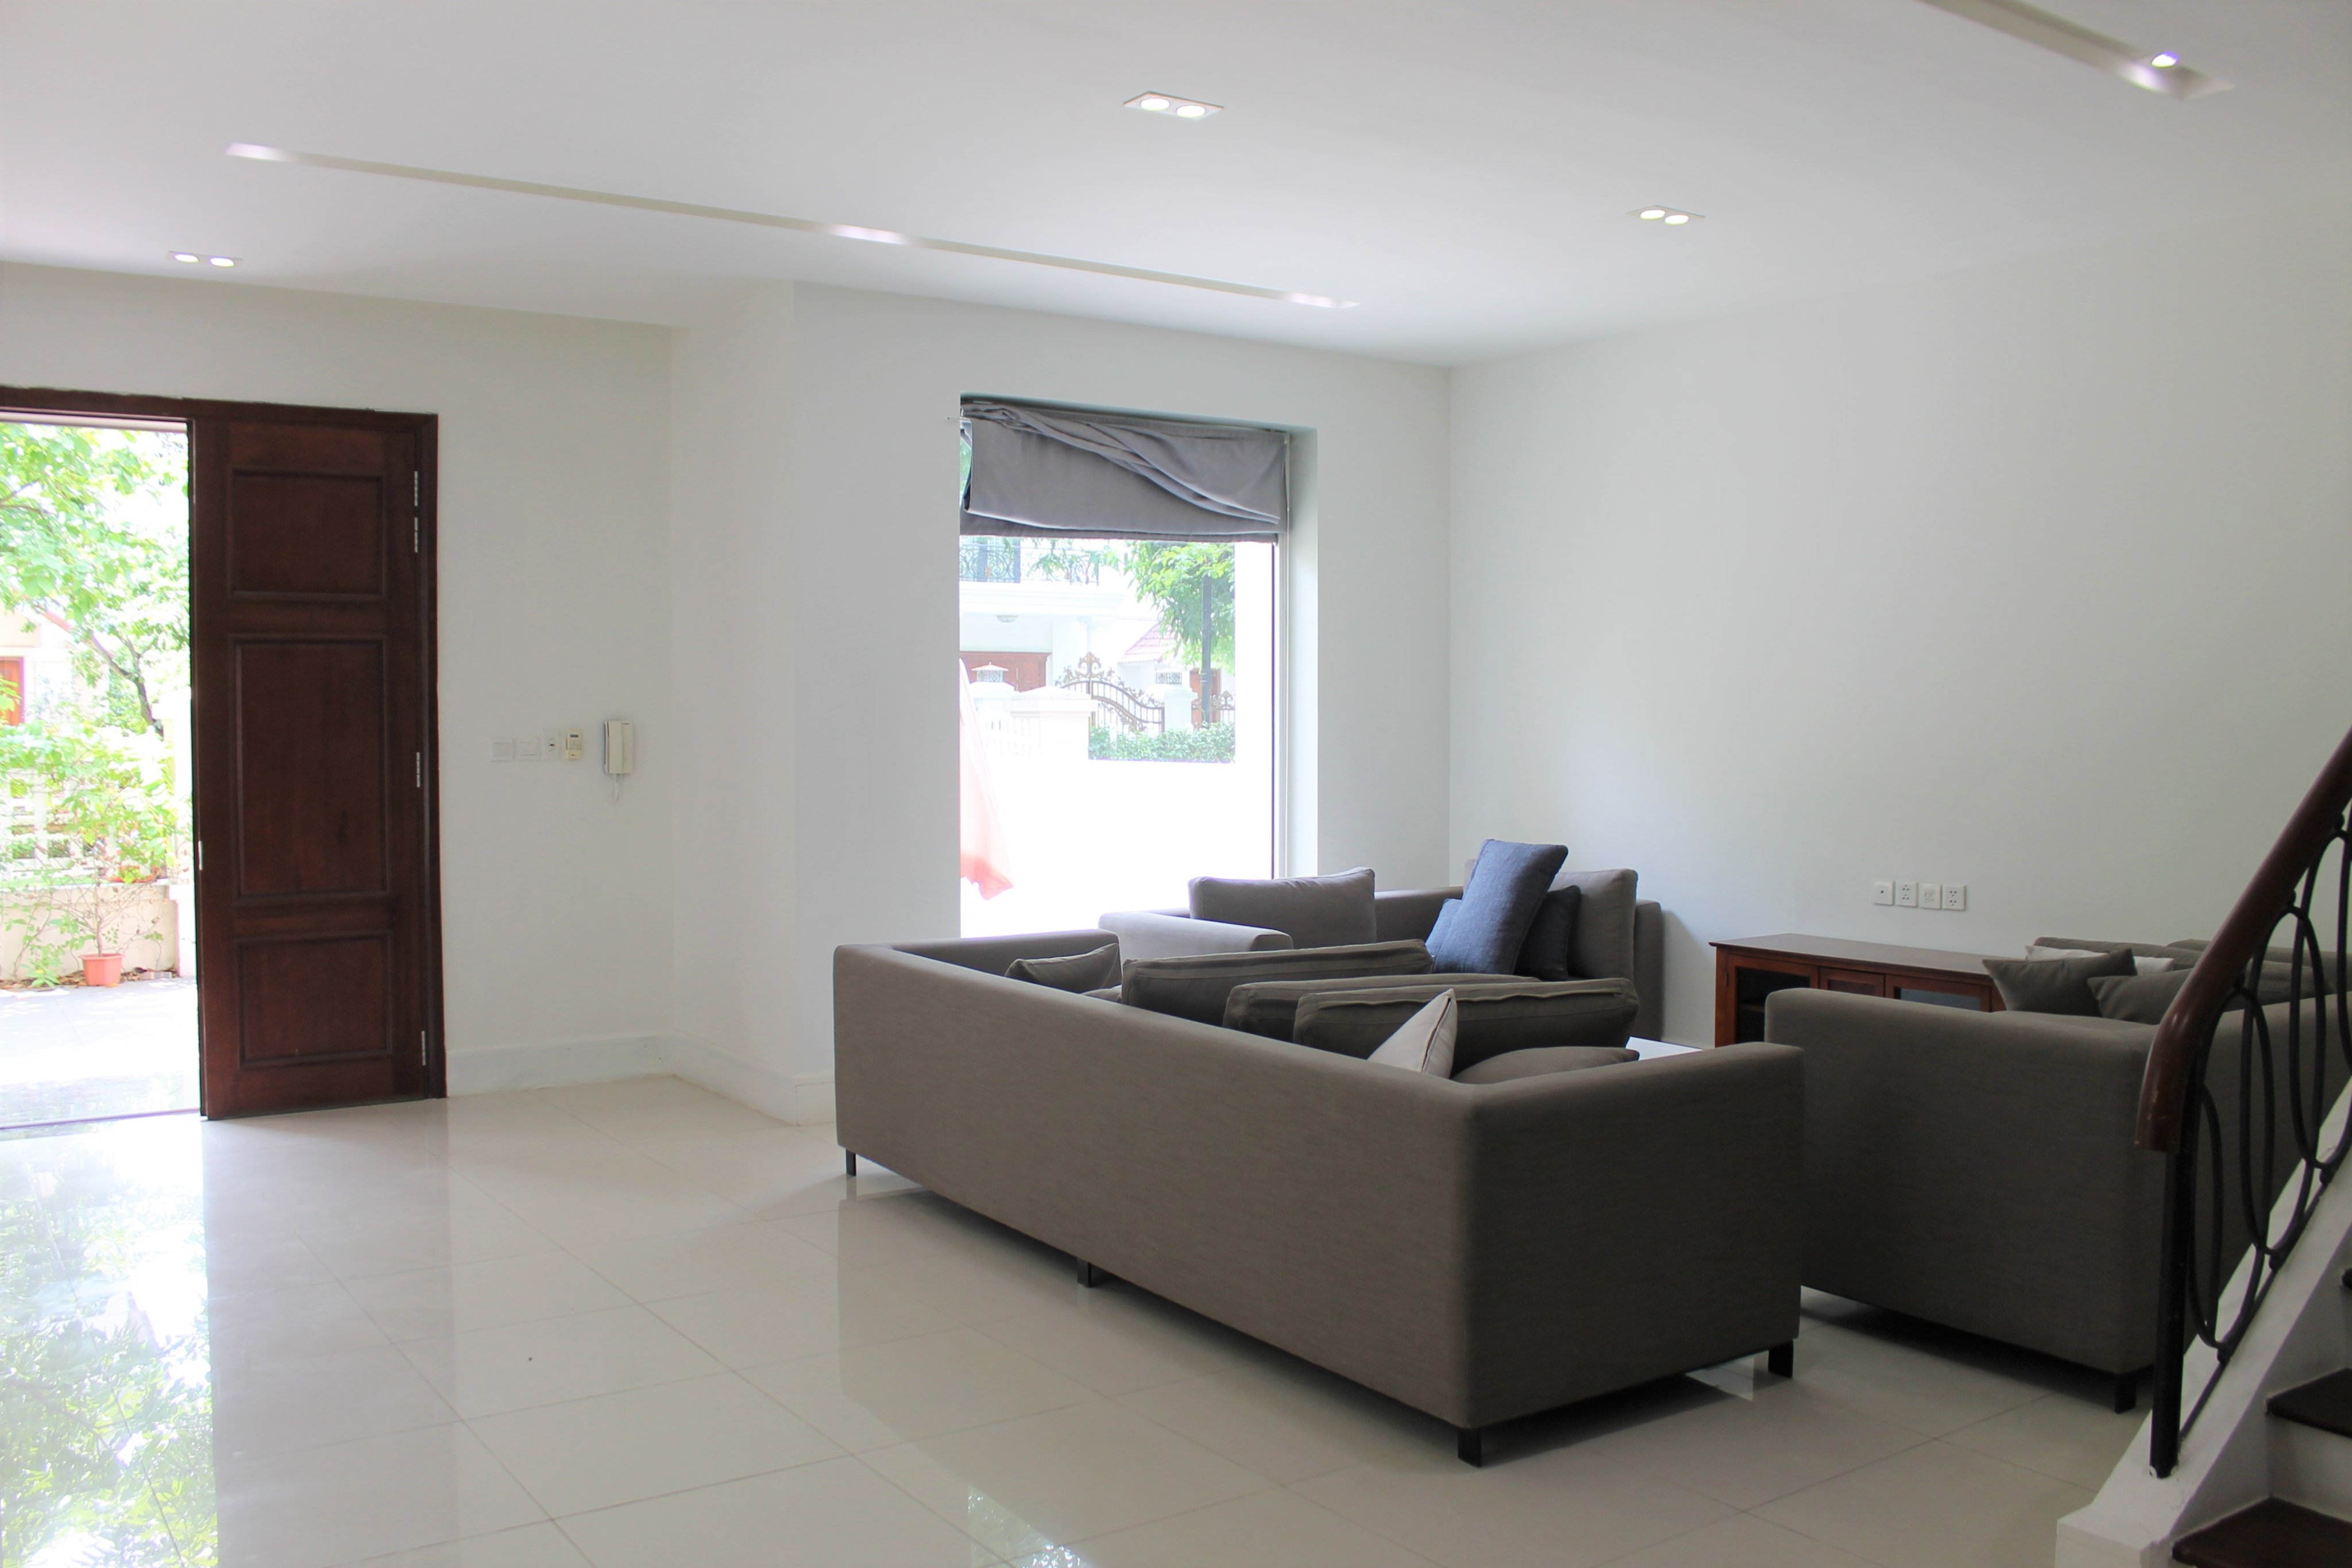 A duplex villa for rent with fully basic furnished - Golf Course and BIS nearby